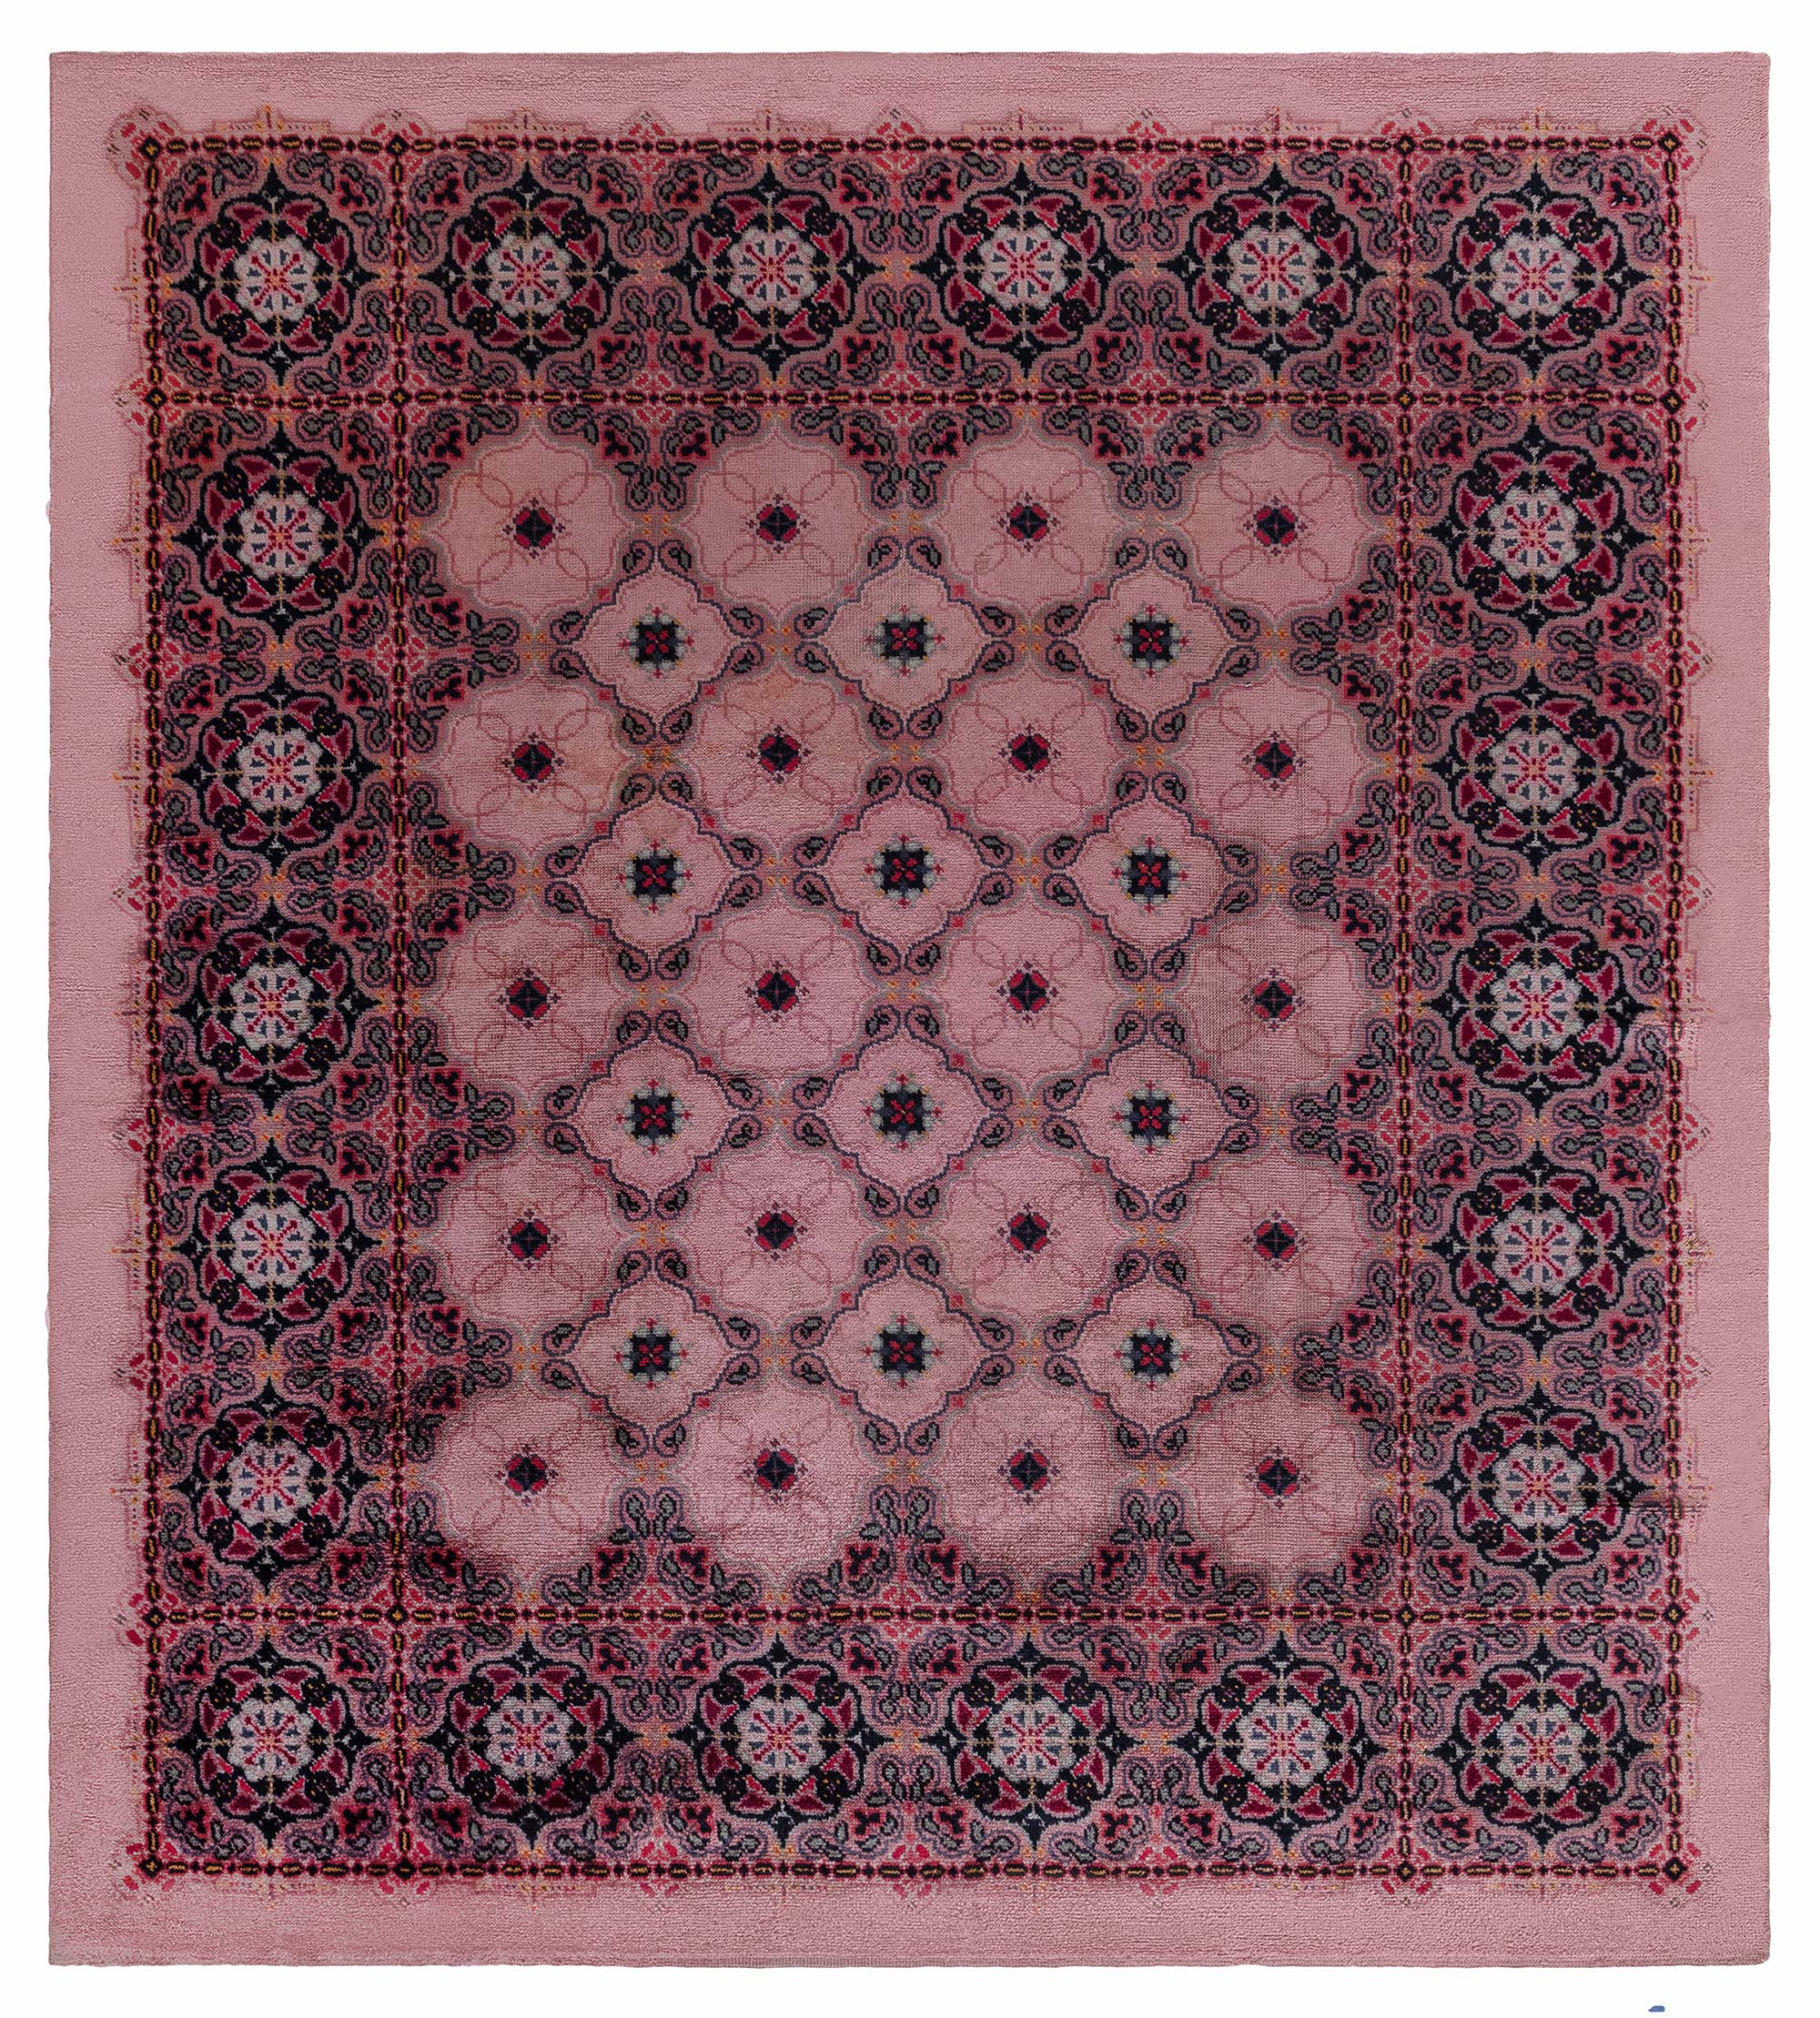 Antique Amsterdam School Design Rug Attributed To KCP De Bazel Executed by KVT For Sale